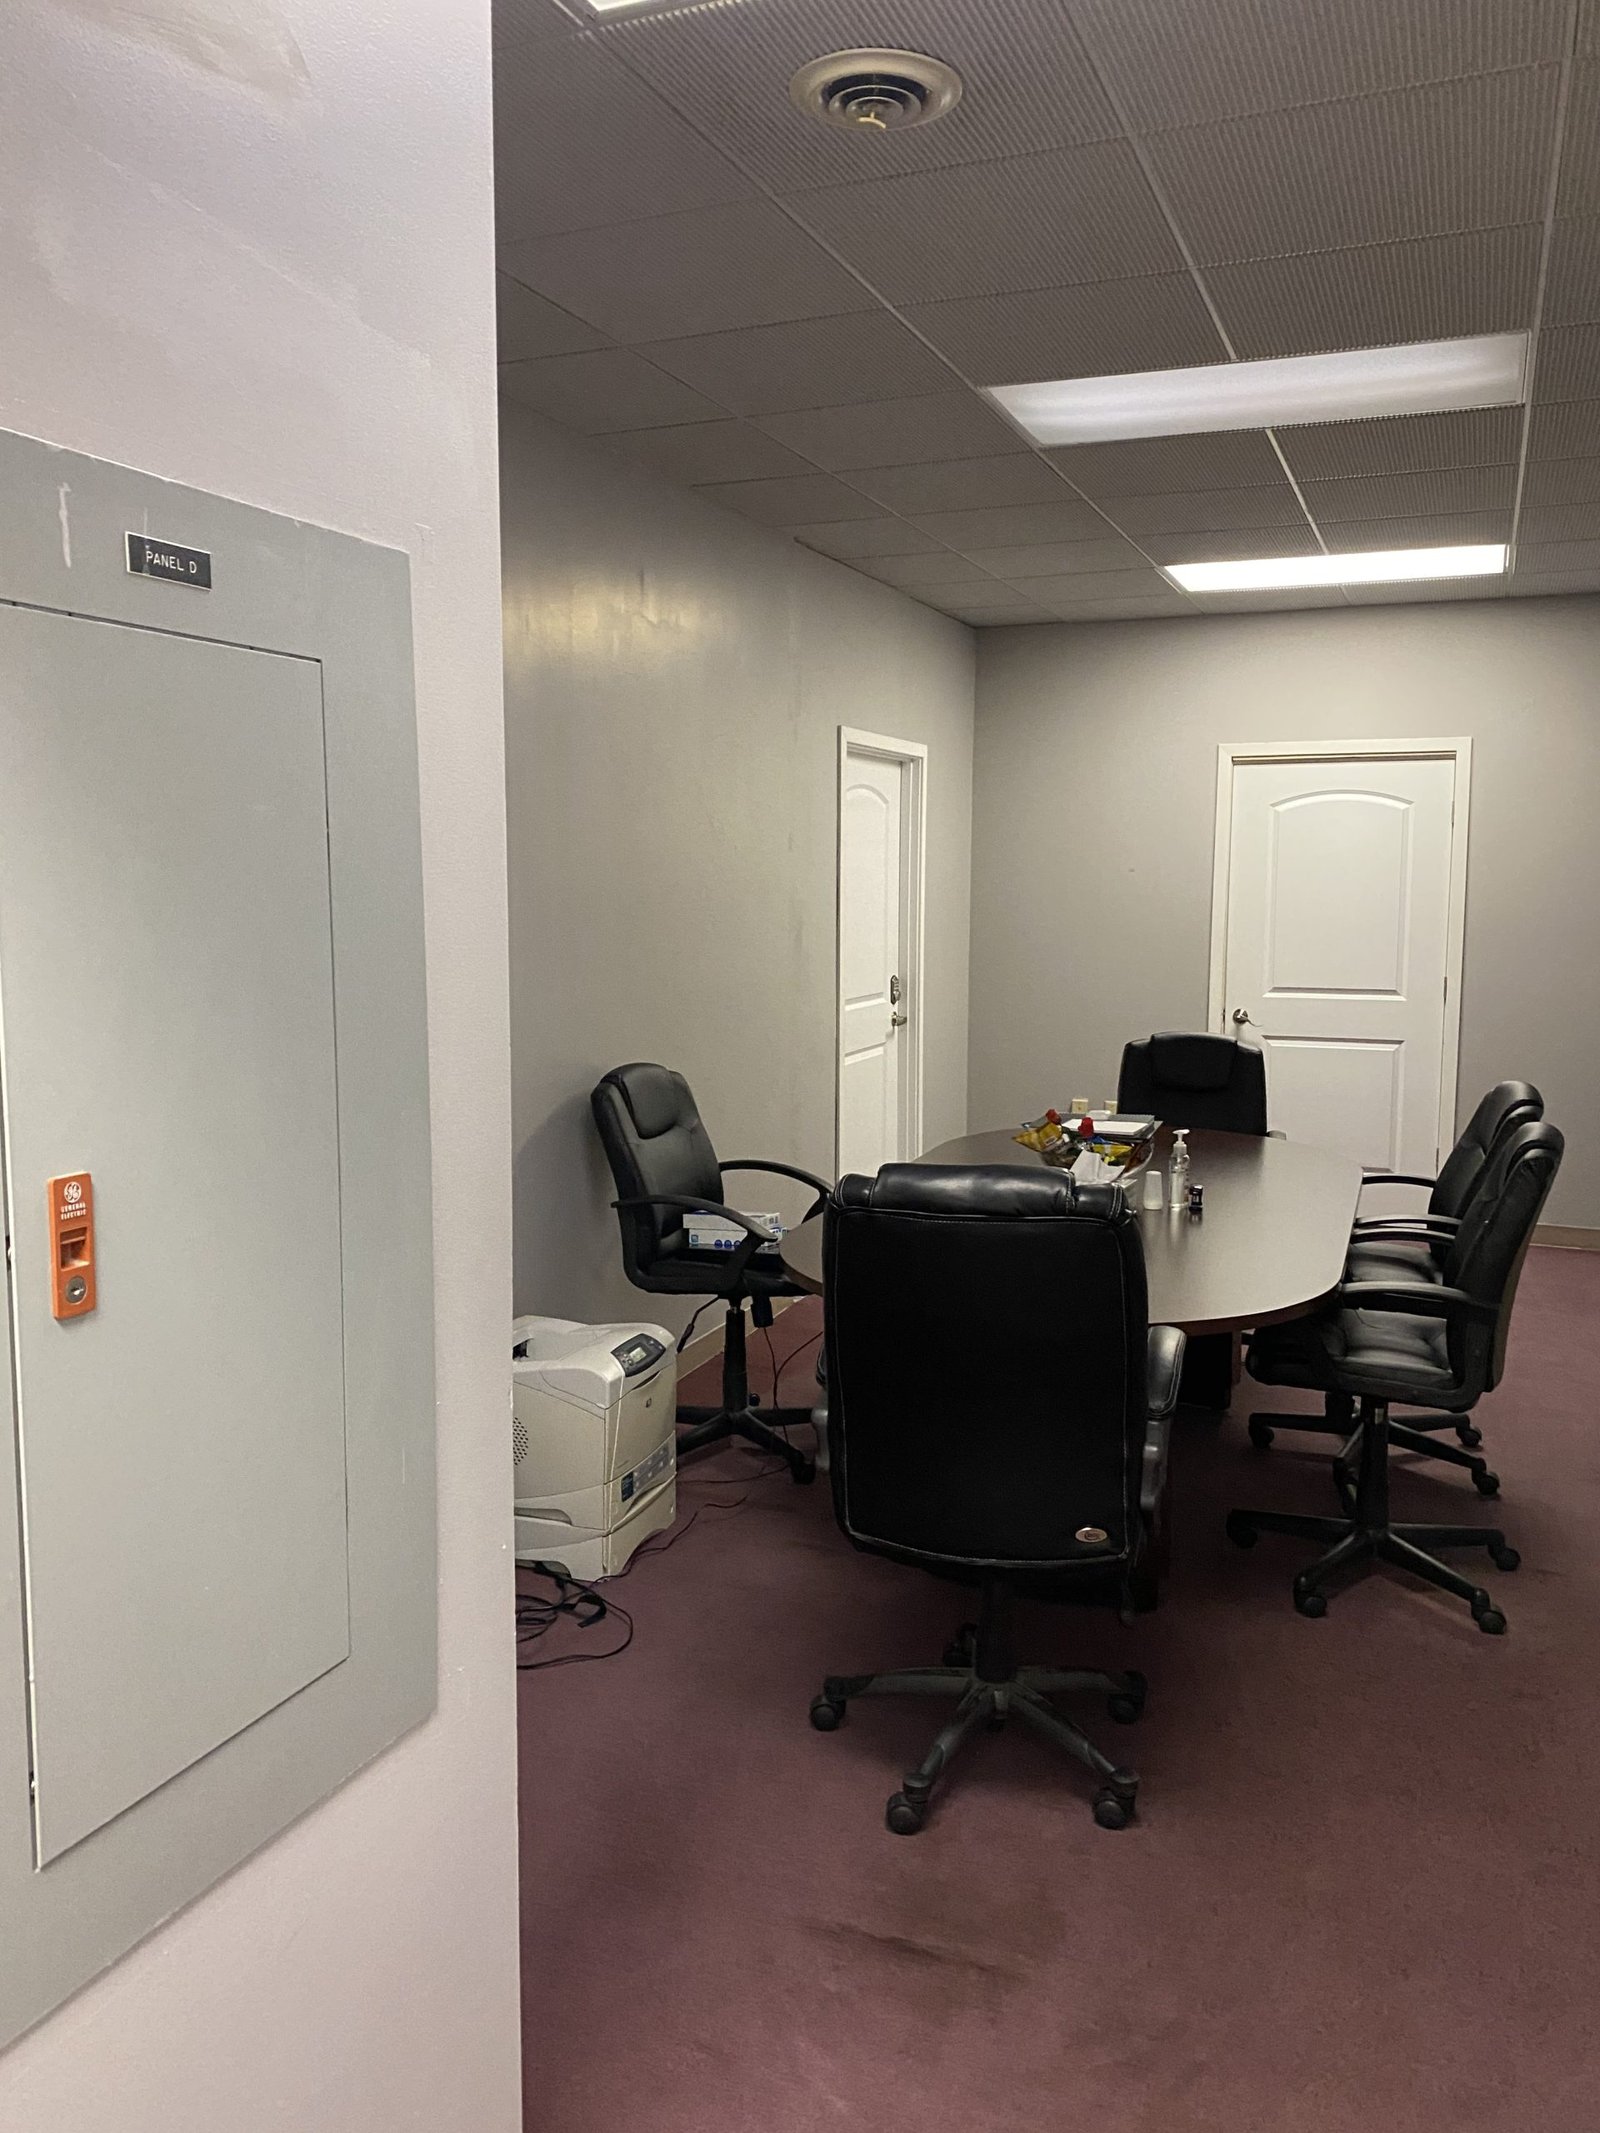 conference room cleaning service in Kalamazoo Michigan cleaning service in Kalamazoo Michigan